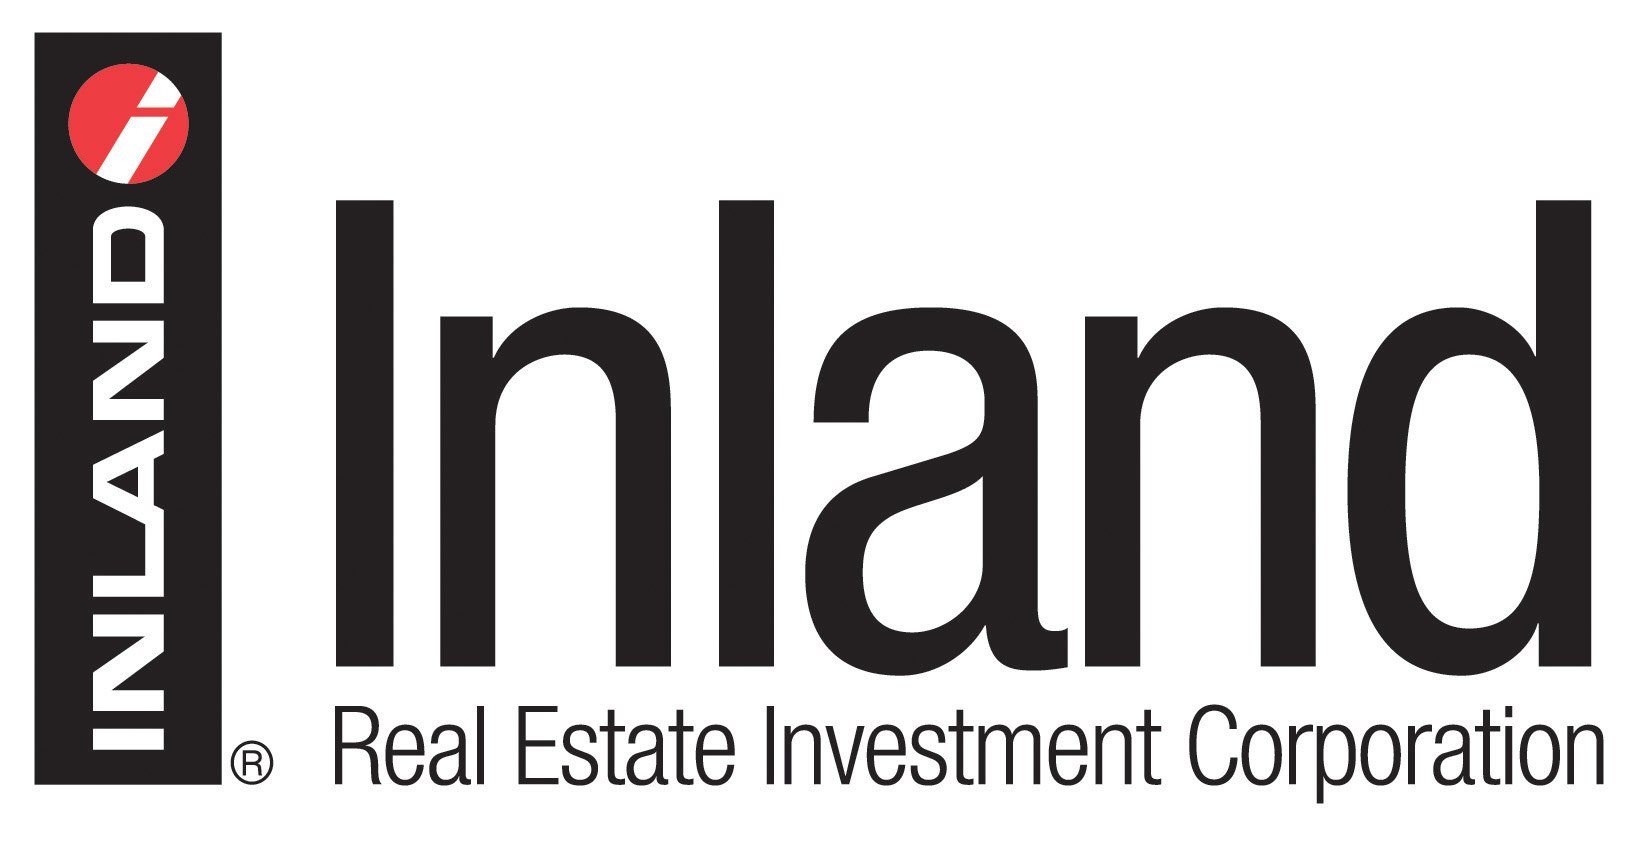 Inland Real Estate Investment Corporation logo